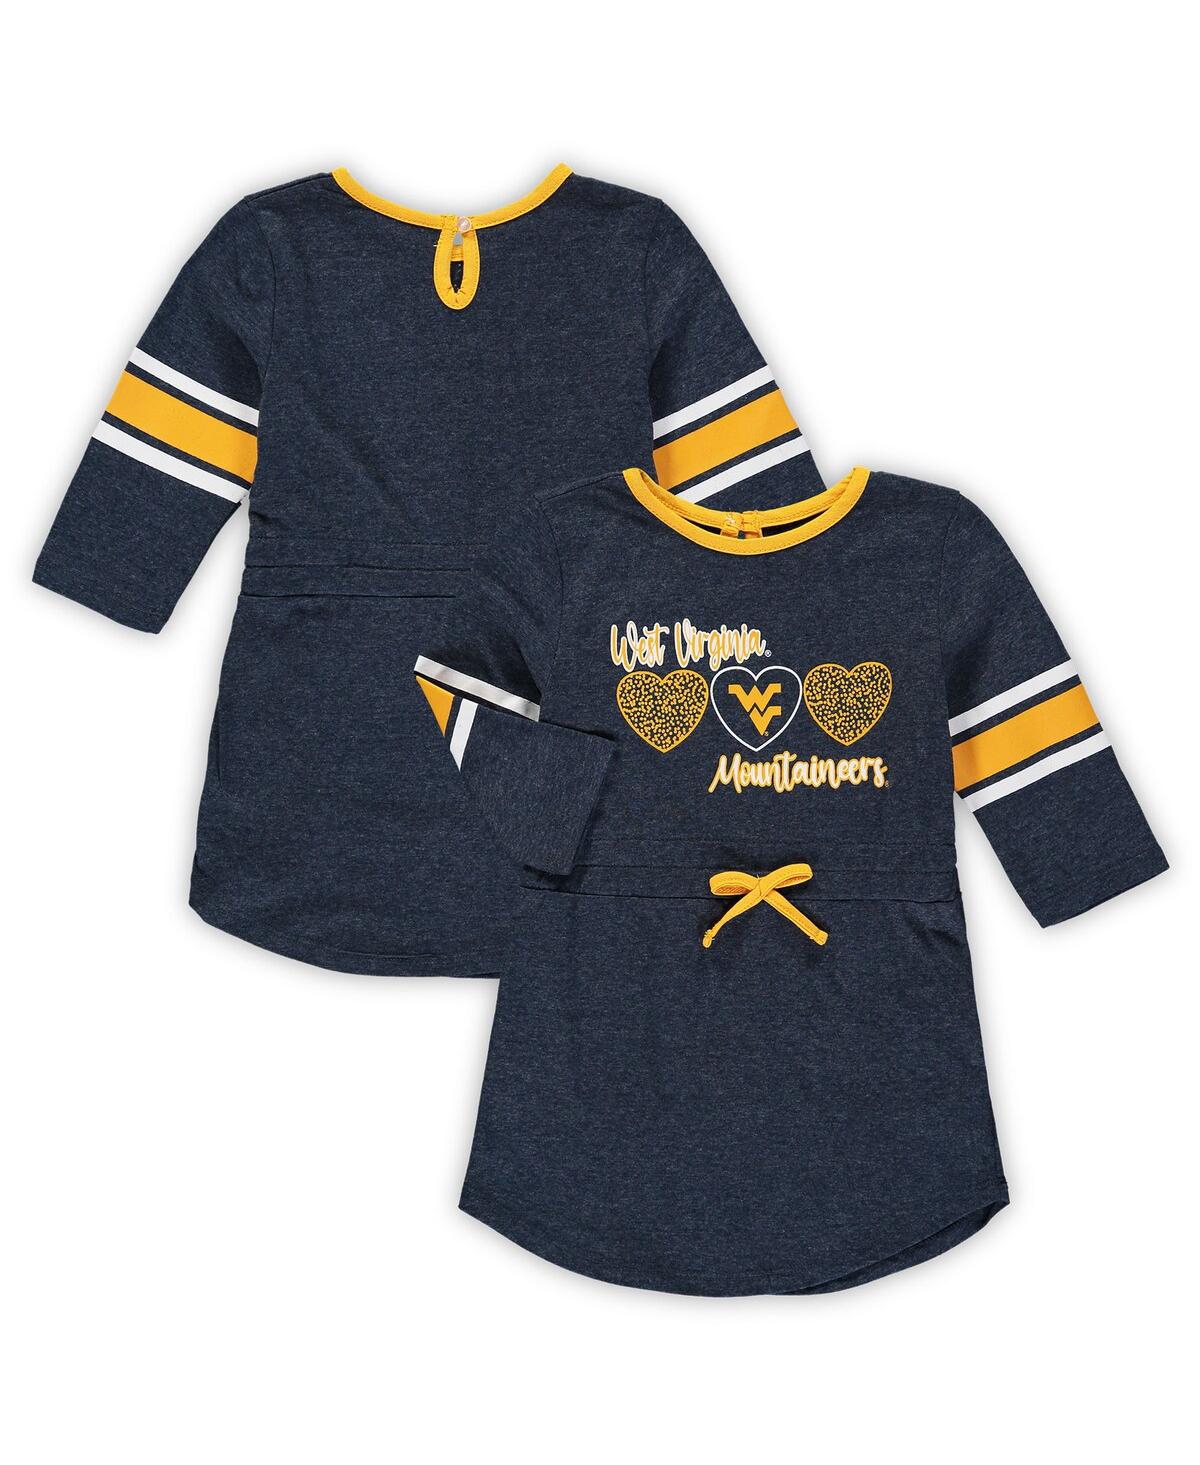 Shop Colosseum Girls Toddler  Heathered Navy Distressed West Virginia Mountaineers Poppin Sleeve Stripe Dr